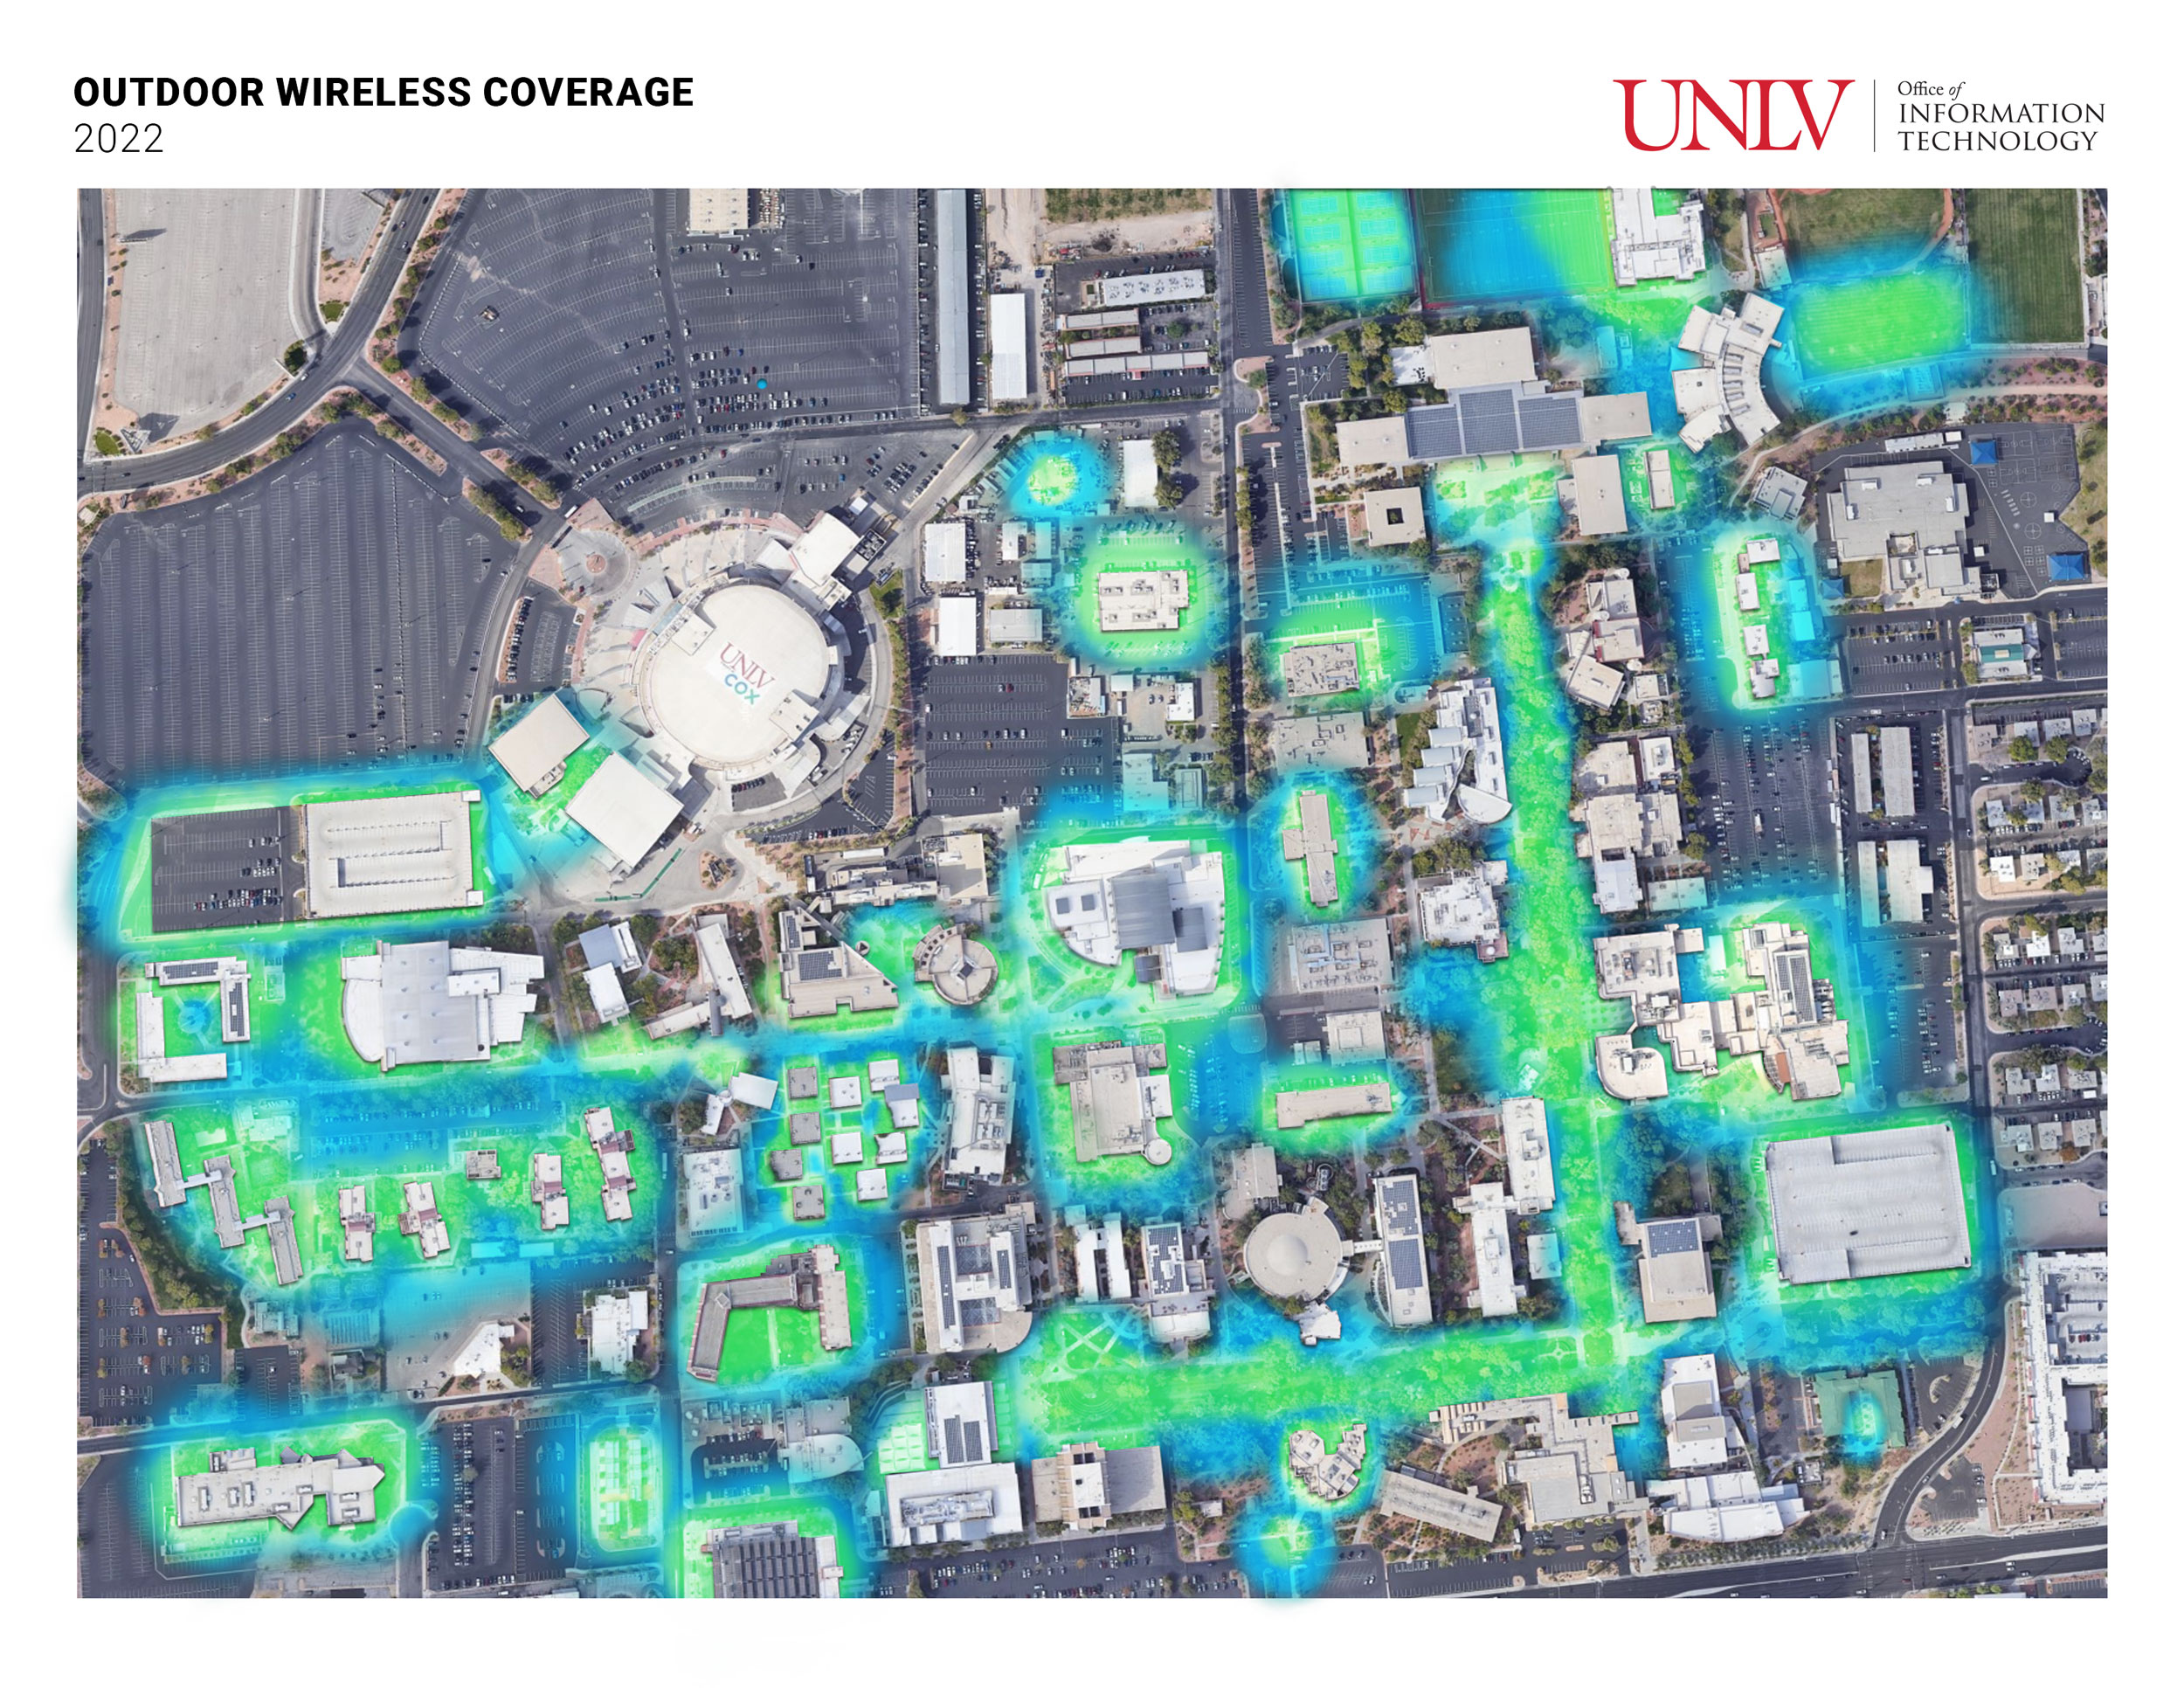 unlv wireless coverage map of 2022